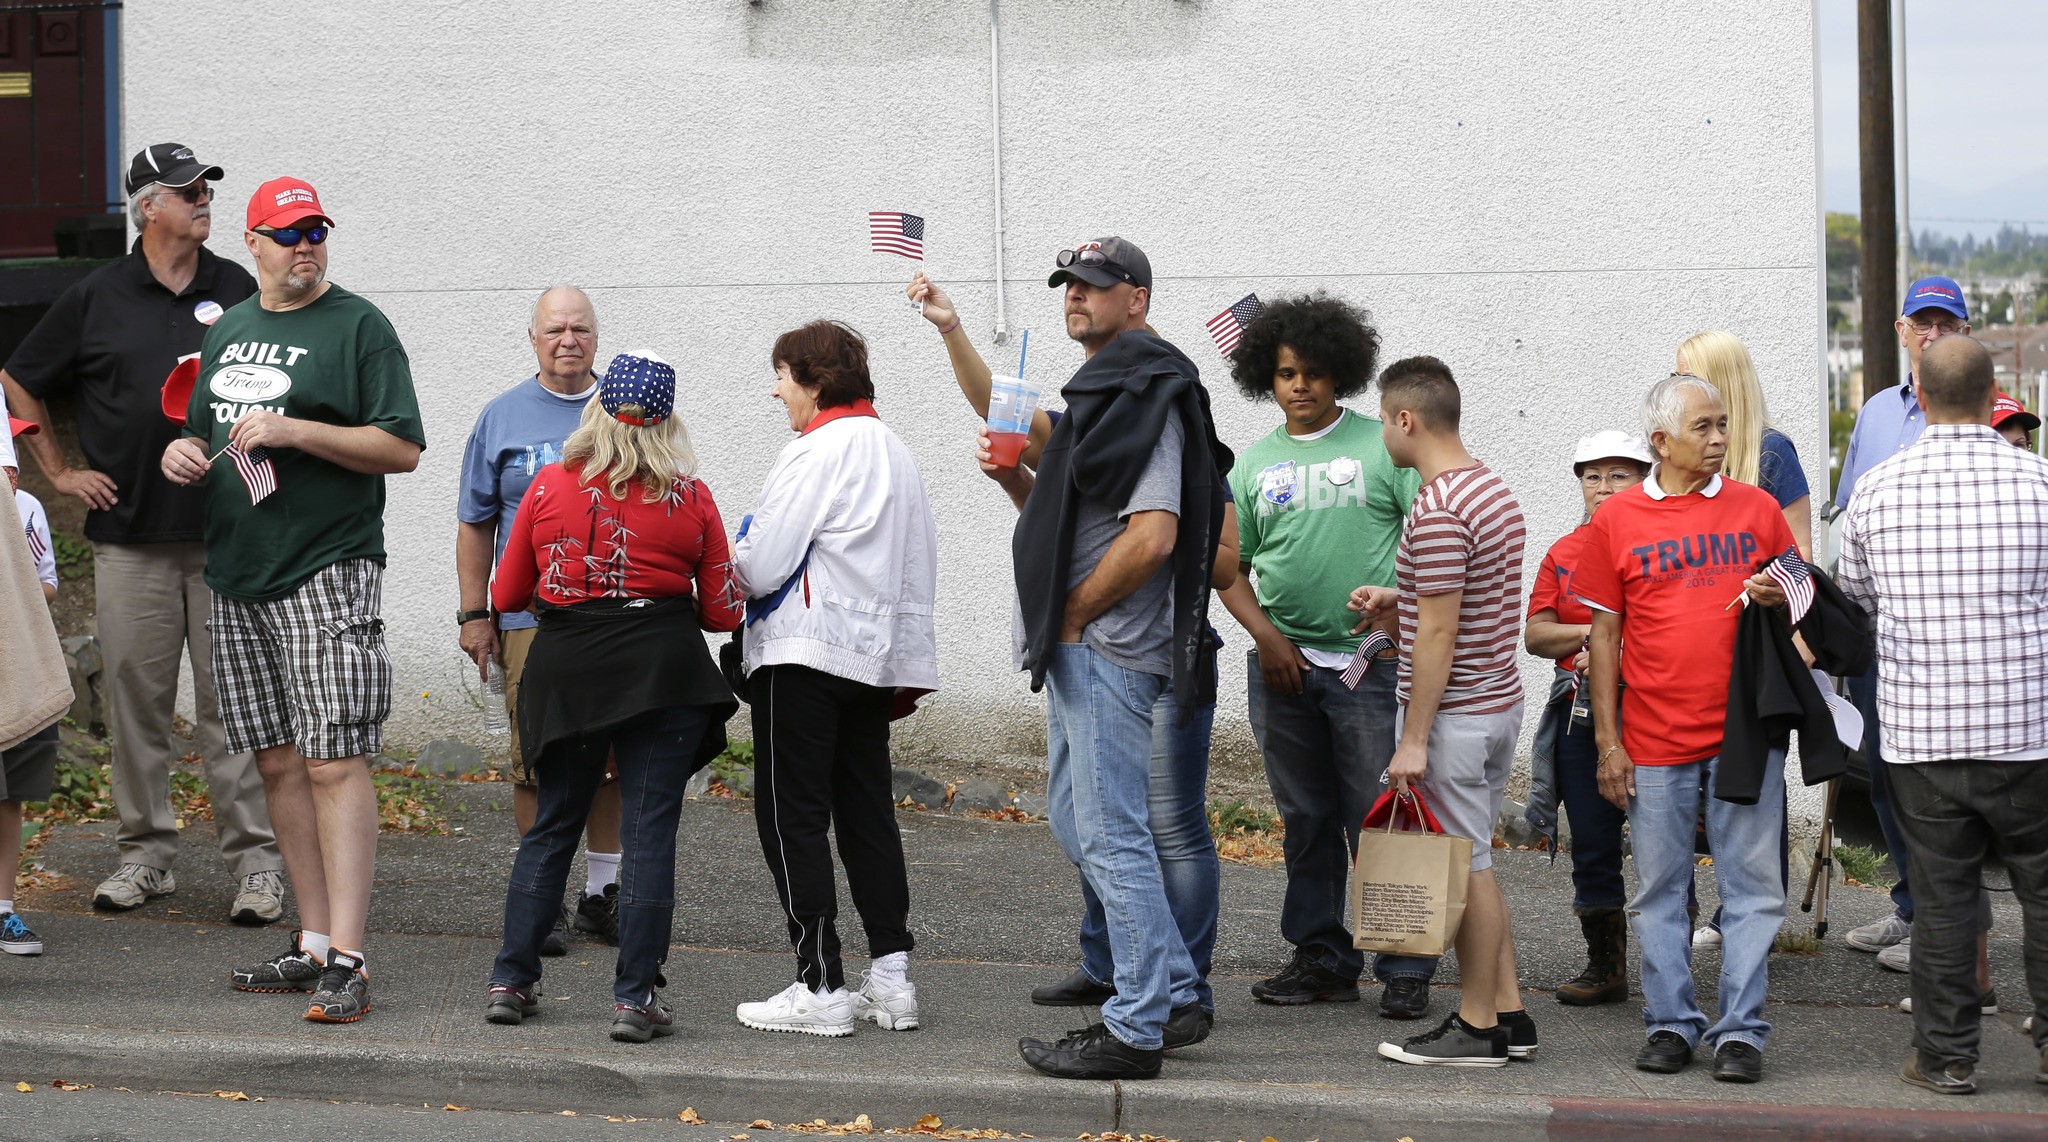 Supporters of Republican presidential candidate Donald Trump wait in line for a rally Tuesday in Everett. (Ted S. Warren/The Associated Press)